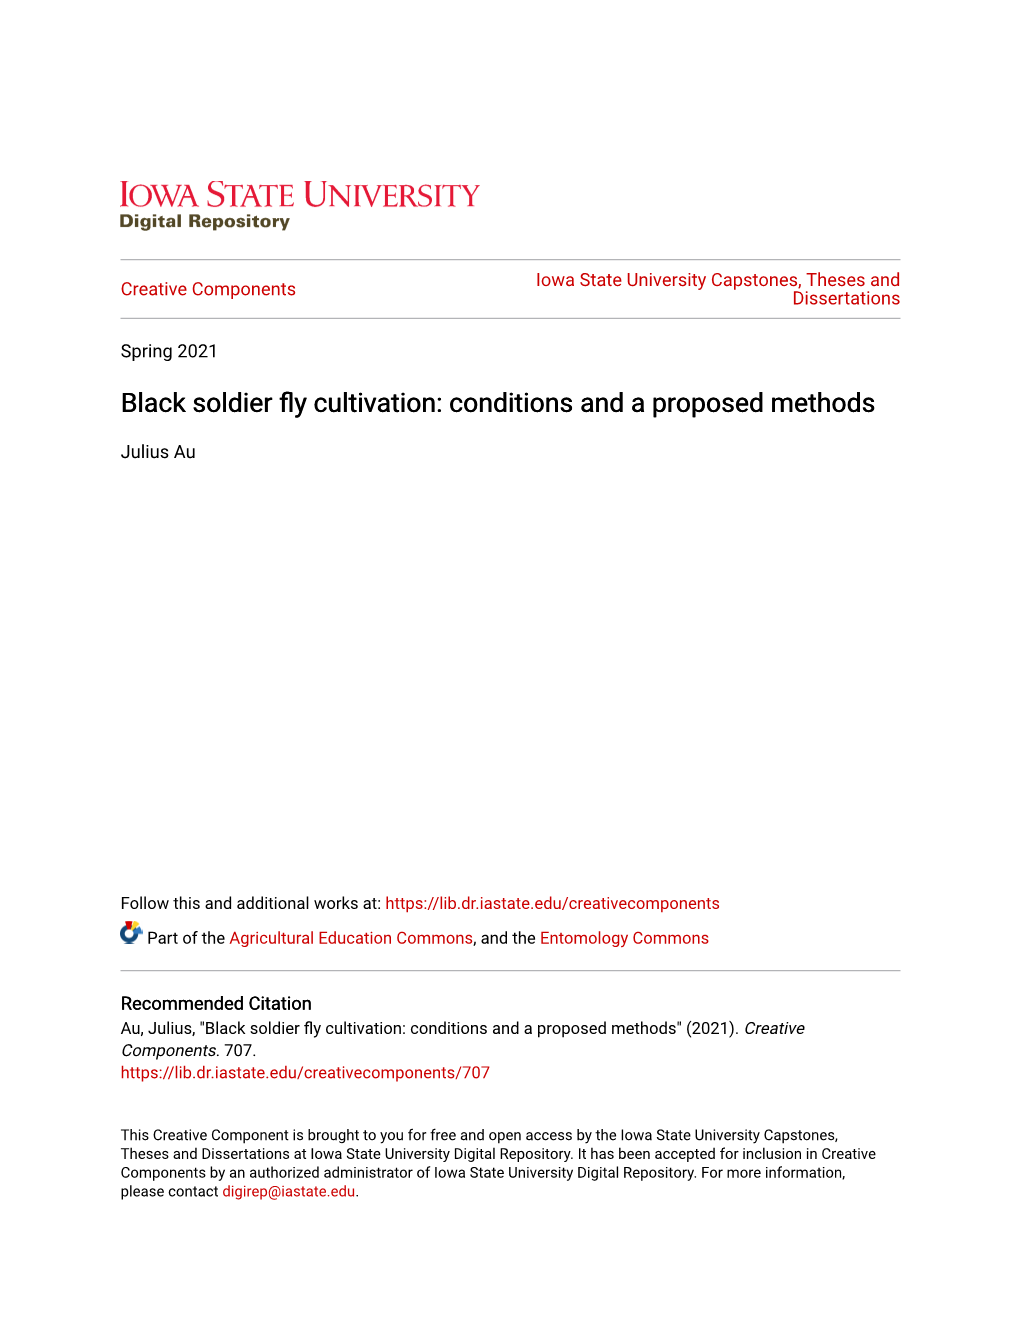 Black Soldier Fly Cultivation: Conditions and a Proposed Methods